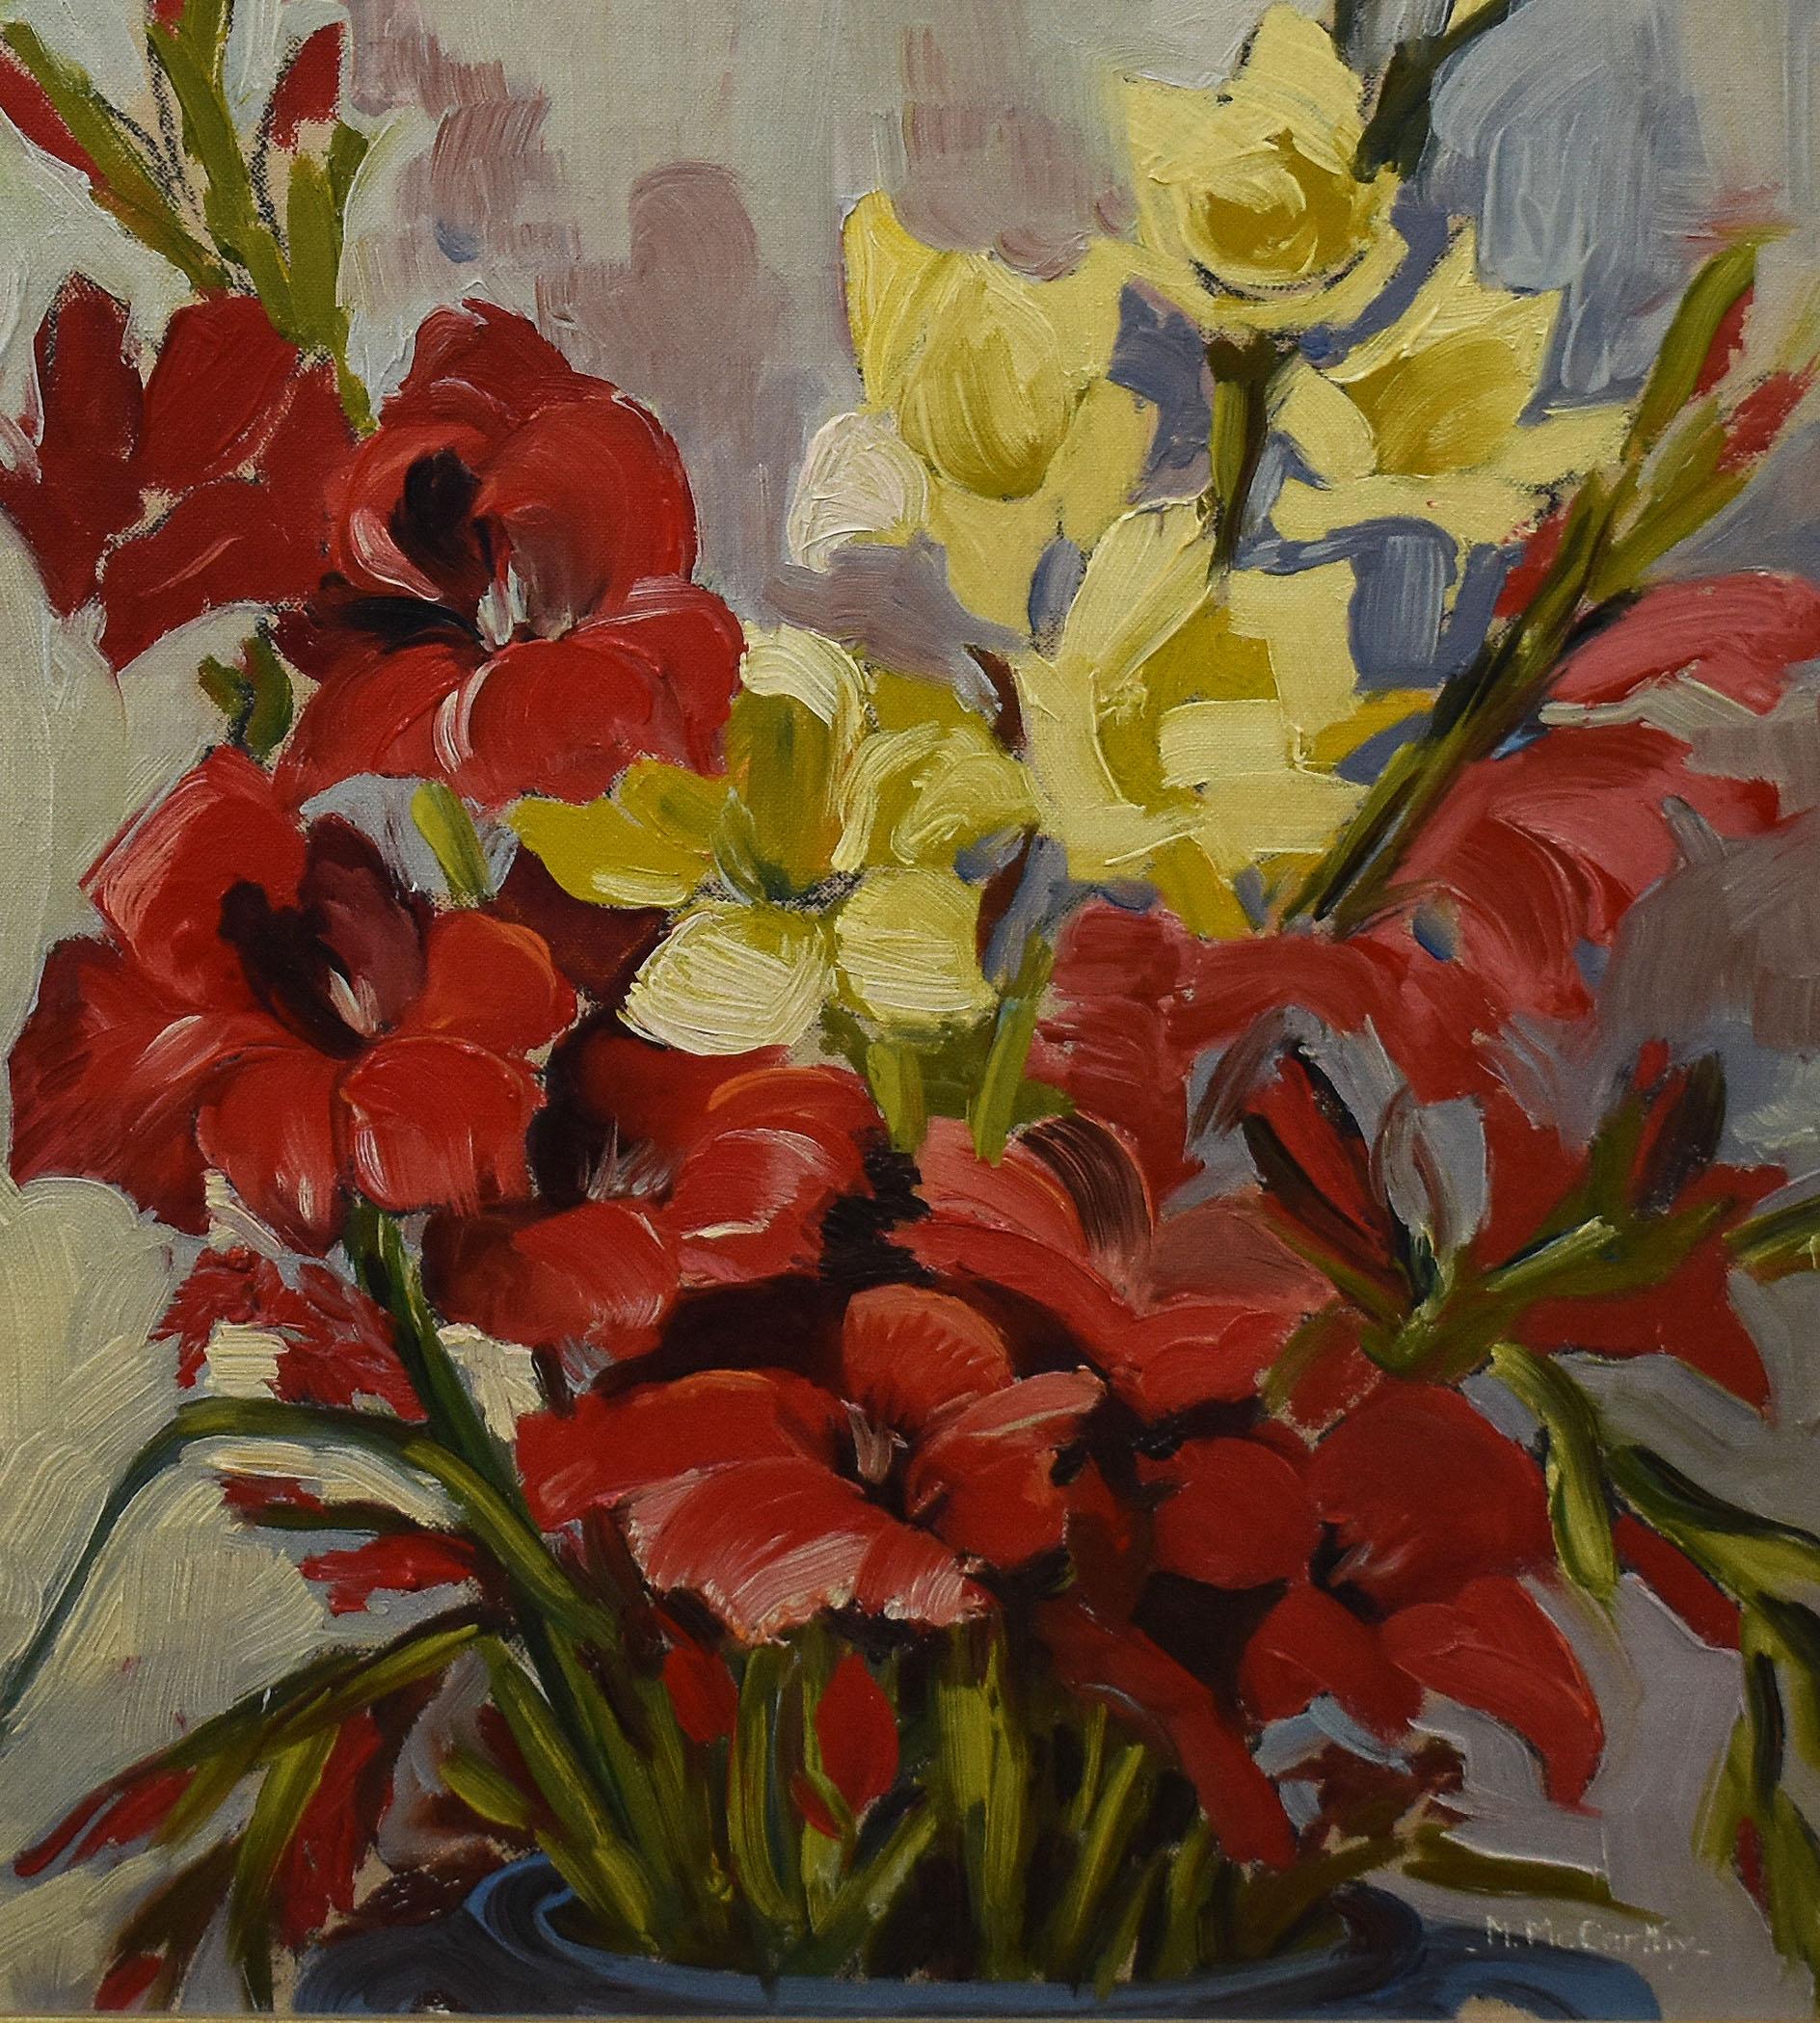 Modernist stil life of flowers by Mary Beich  (1917 - 2002).   Oil on board, circa 1945.  Signed lower right.  Displayed in a modernist frame.  Image size, 14